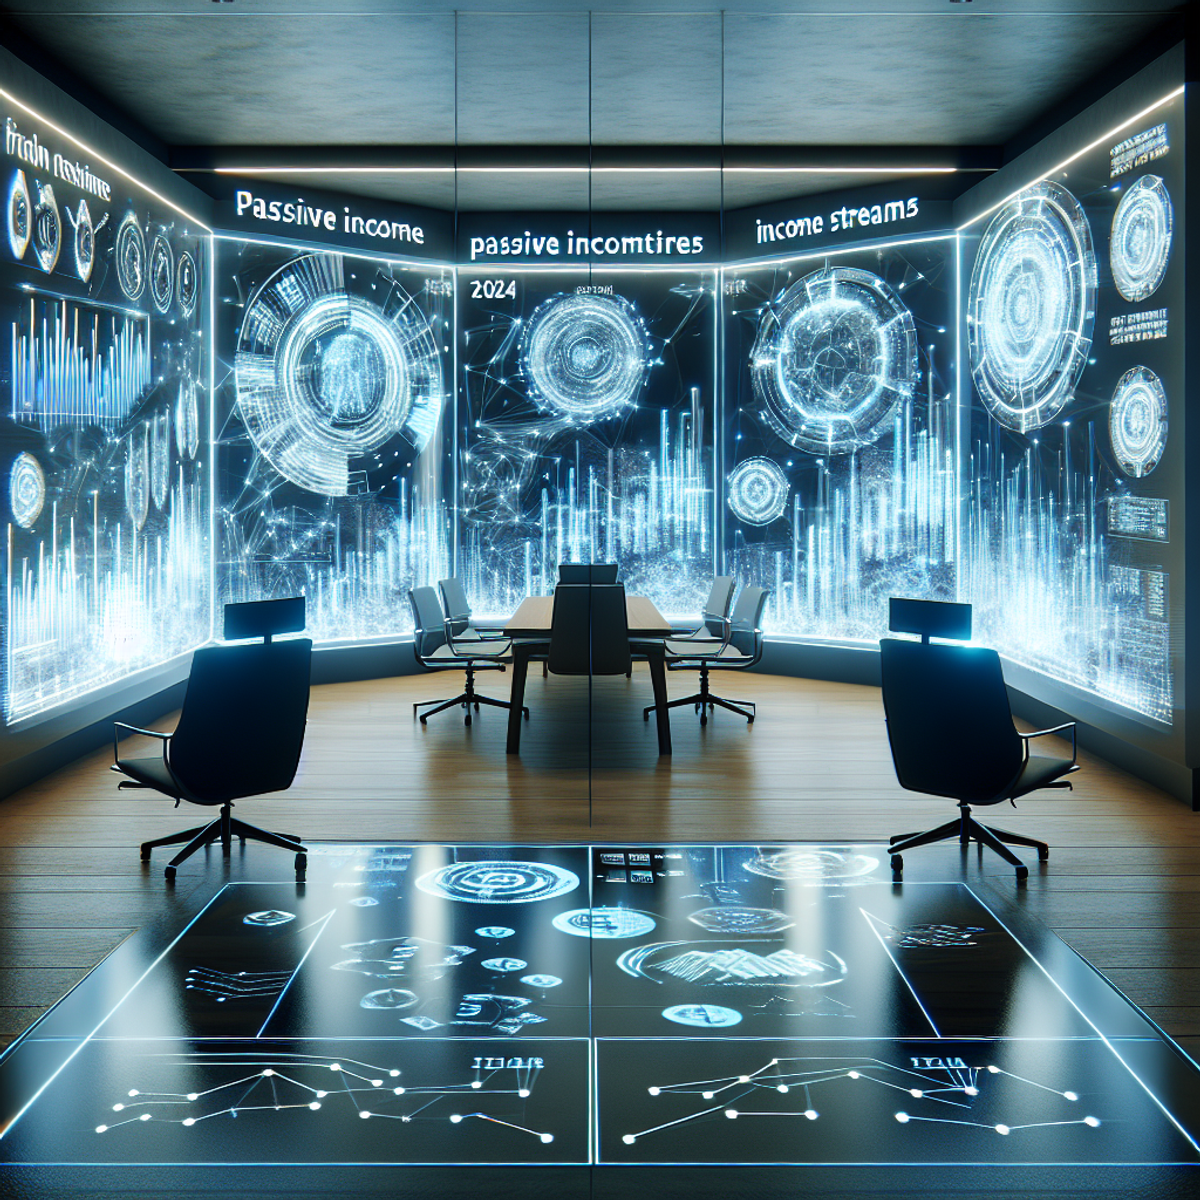 A futuristic office space filled with luminescent, holographic charts and graphs showcasing various investment strategies for passive income streams in 2024. The room is generously lit by the glow of the holograms, reflecting off the minimalist, sleek furniture. Technology is seamlessly integrated into every aspect of the office space, giving it a modern, futuristic vibe. The design can be interpreted as a contemporary digital art form, capturing the essence of a futuristic world encapsulated by technology.